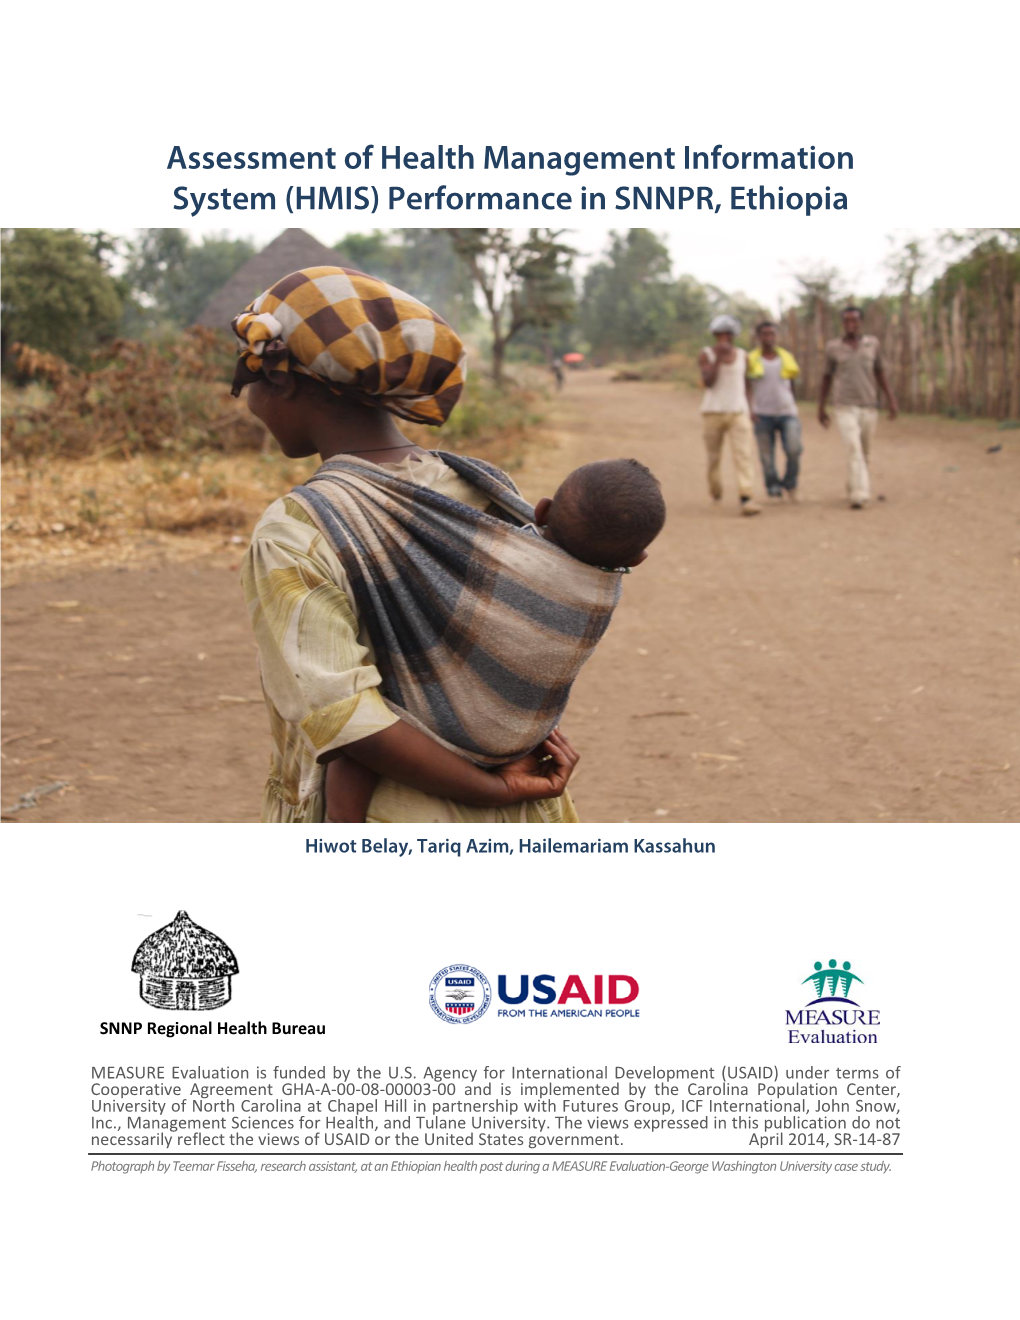 Zonal Health Management Information System (HMIS) Performance Assessment in SNNPR